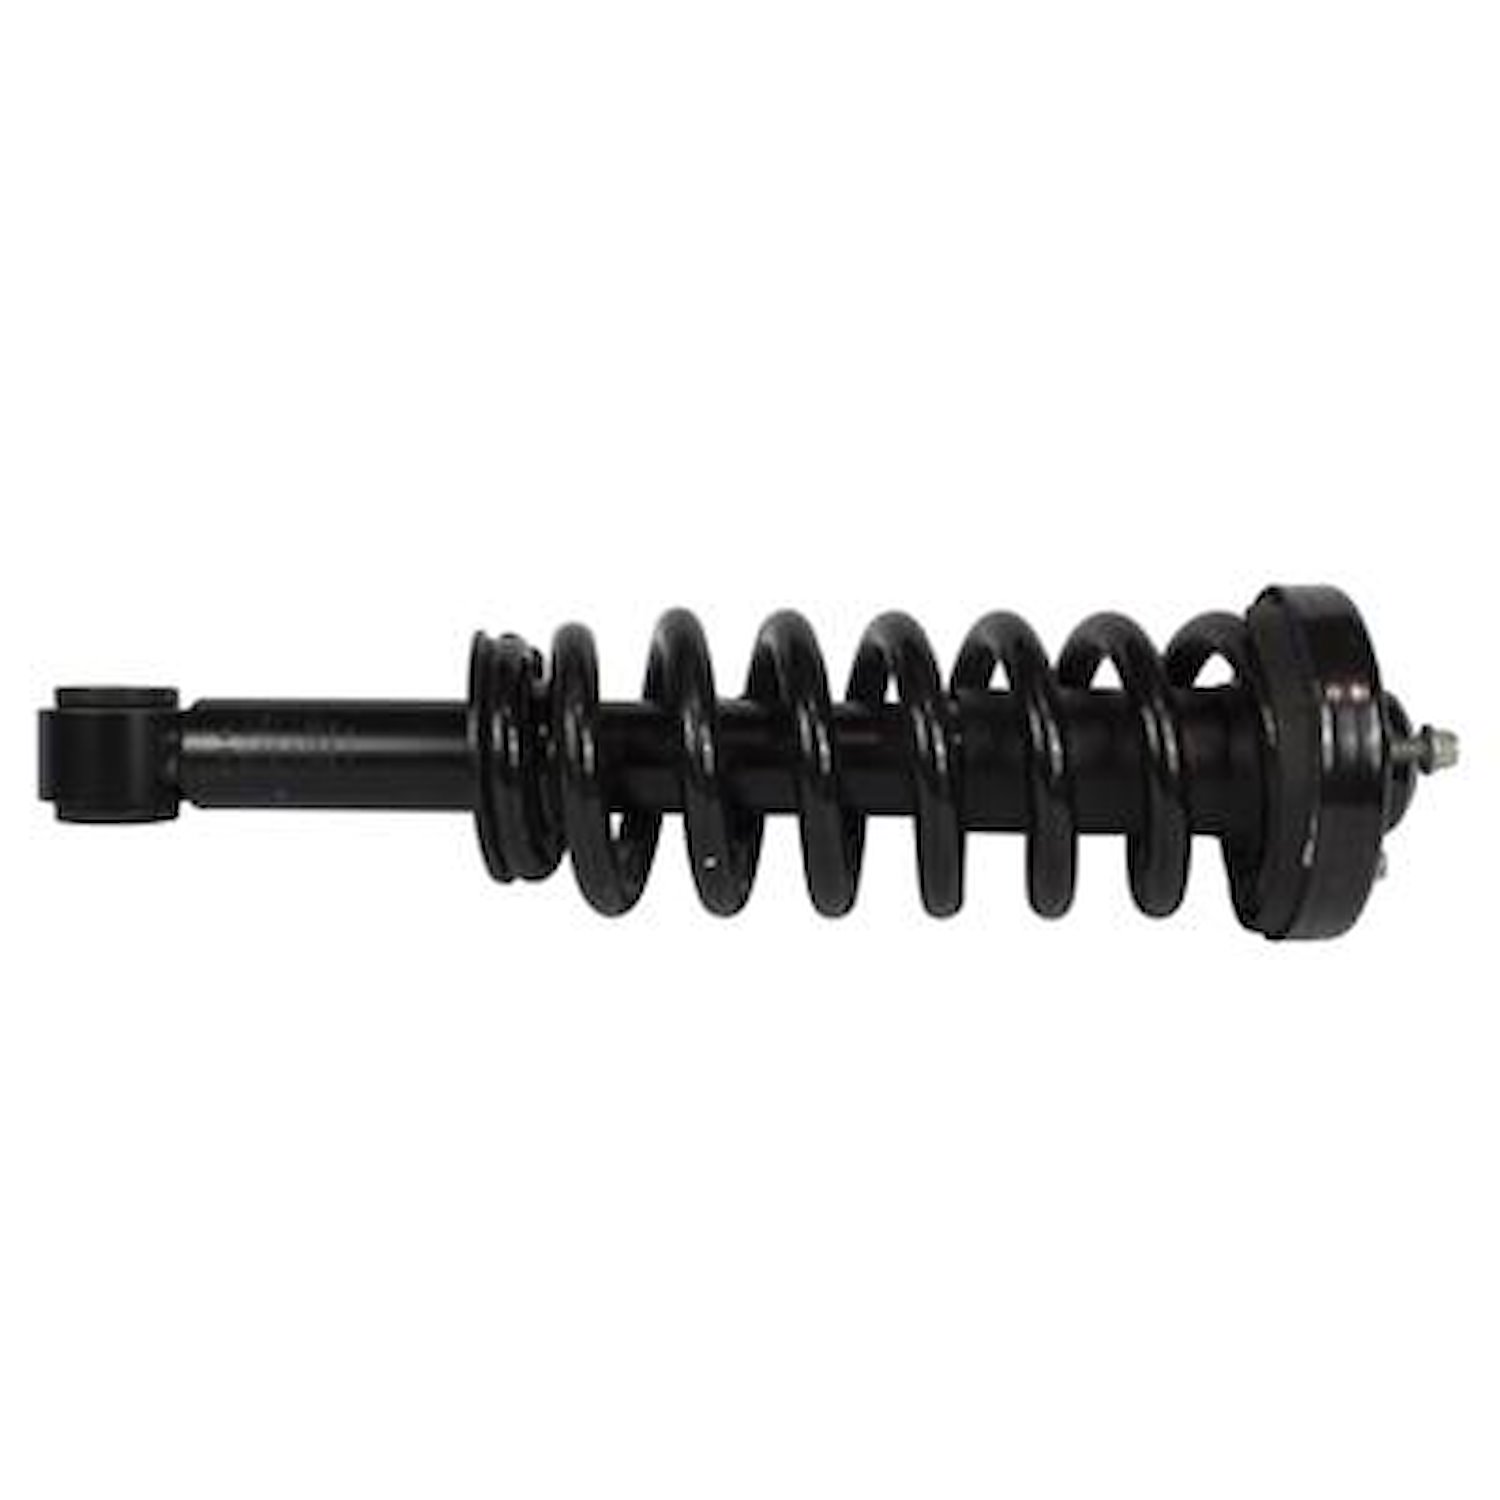 ASTL11 Strut Assembly Fits Select 2006-2008 Ford, Lincoln Models